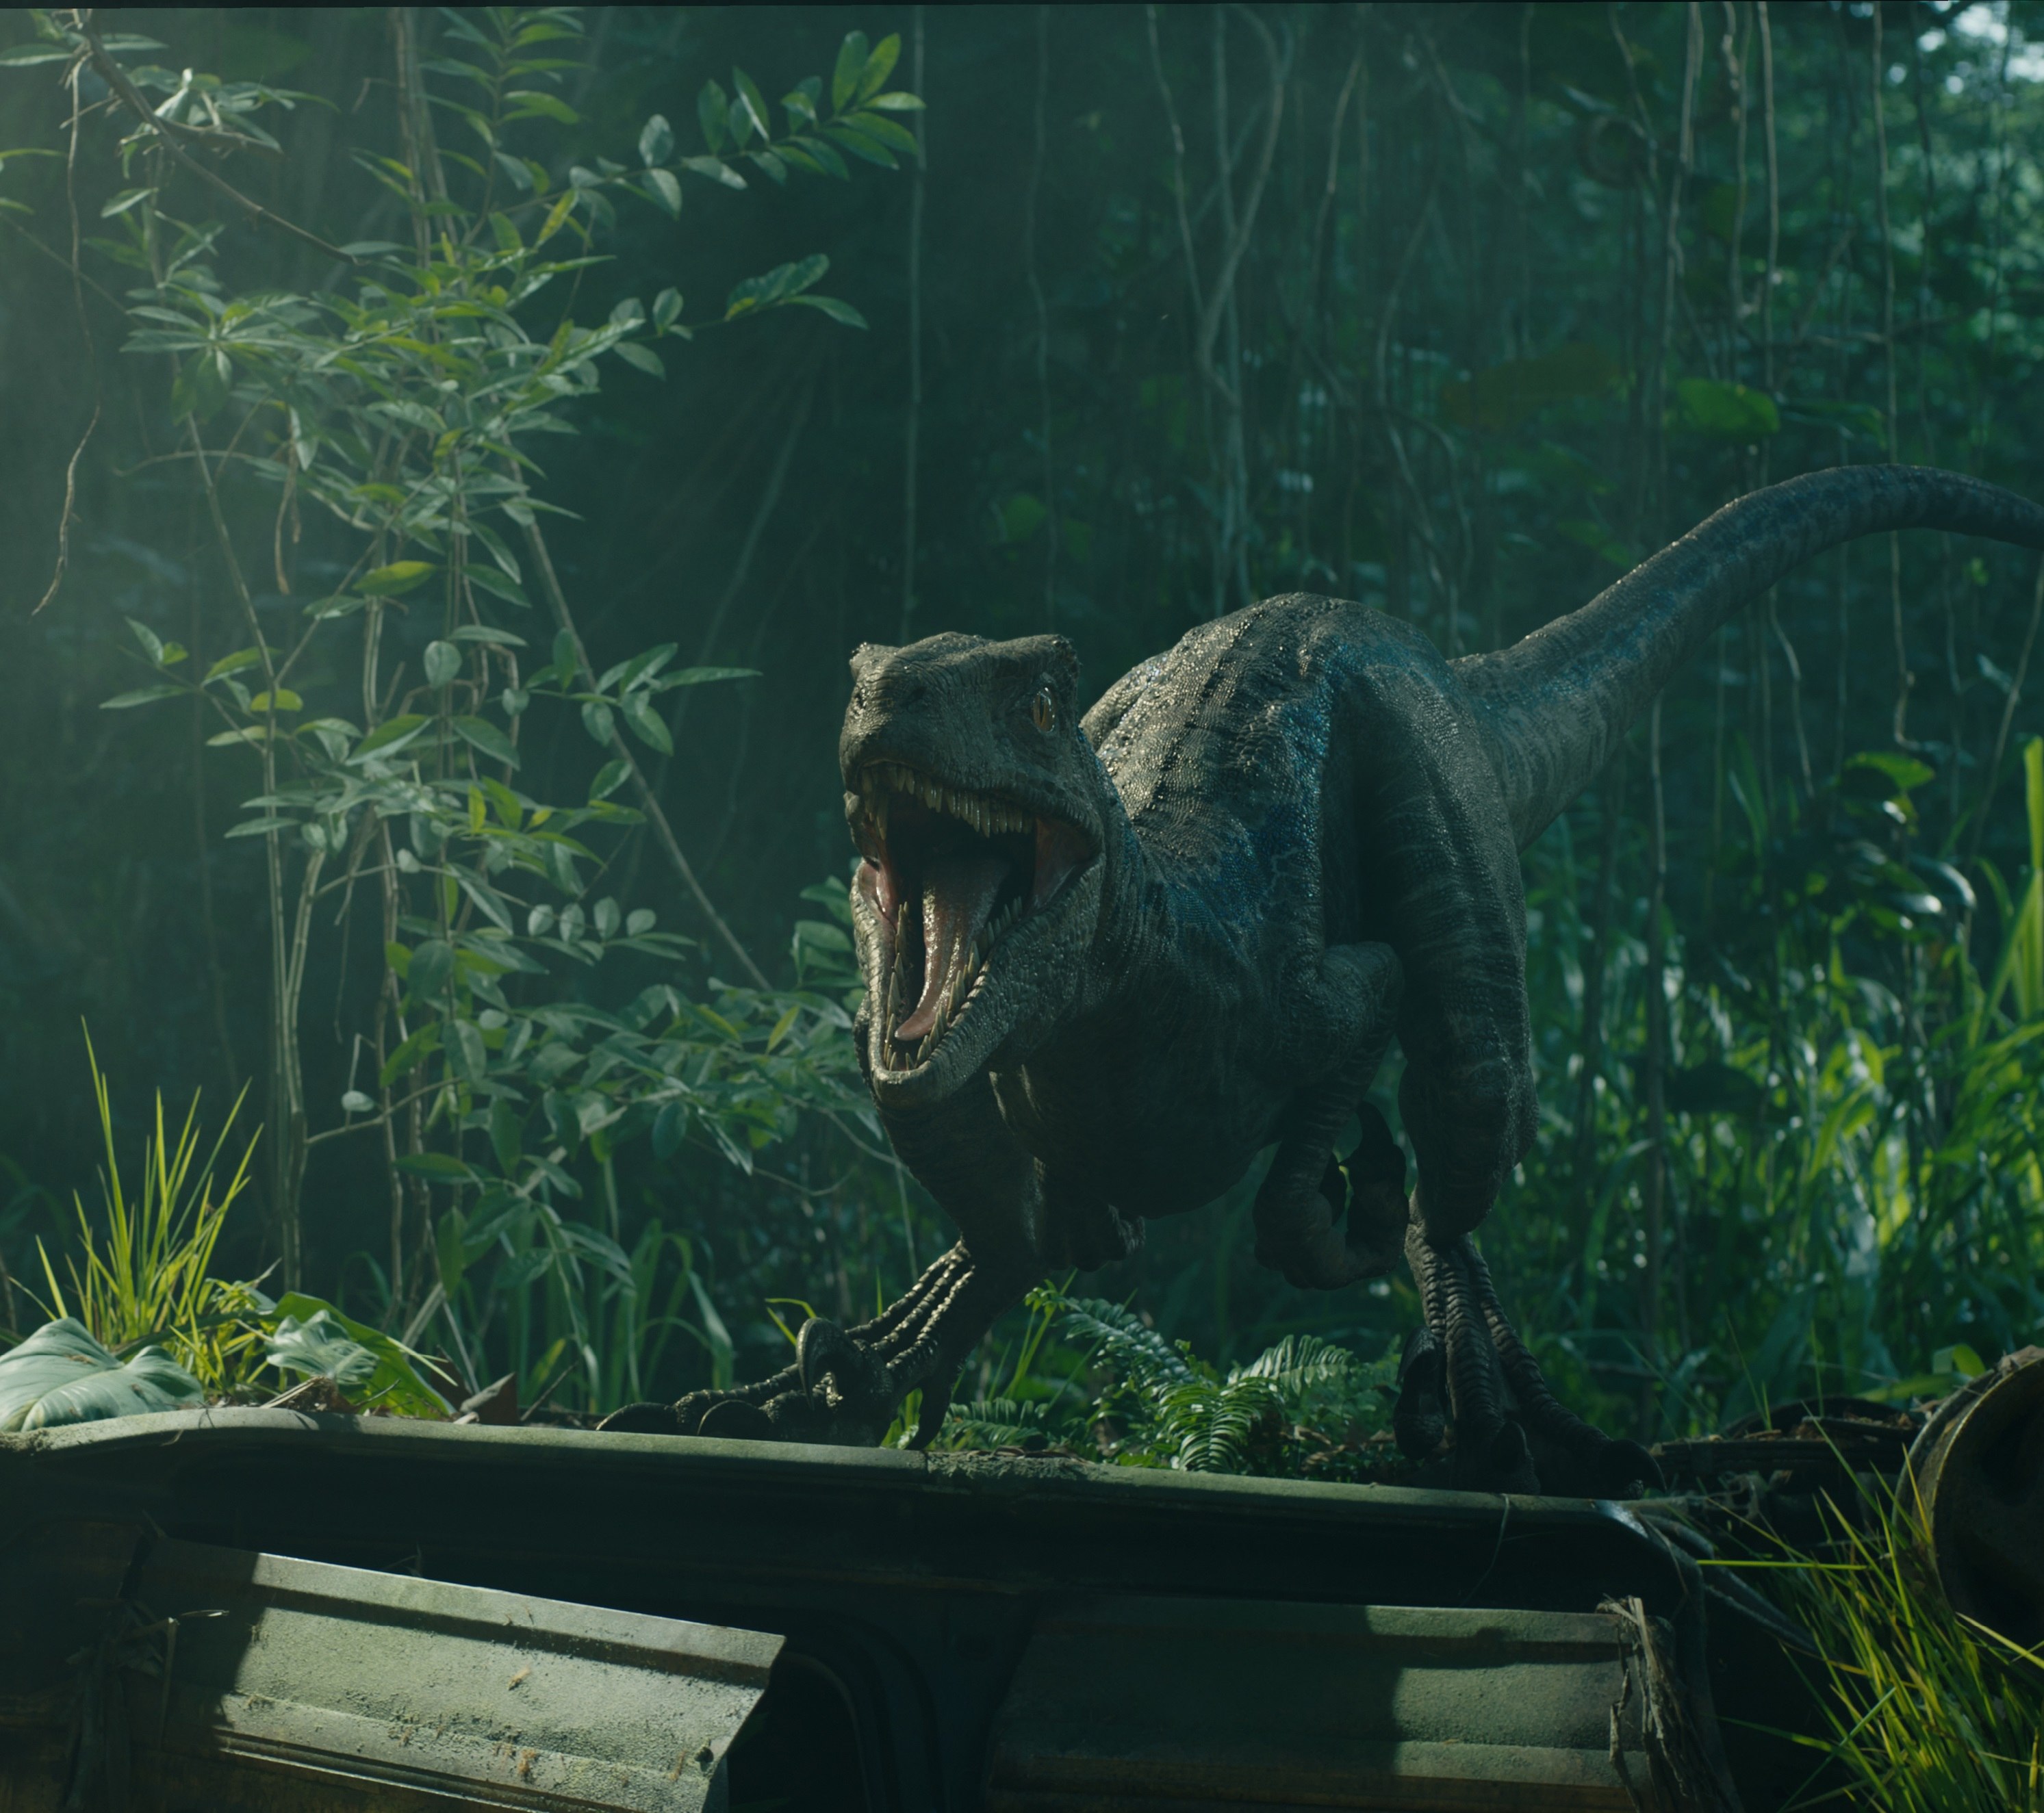 How Ilm Blended Practical And Digital Effects For Jurassic World